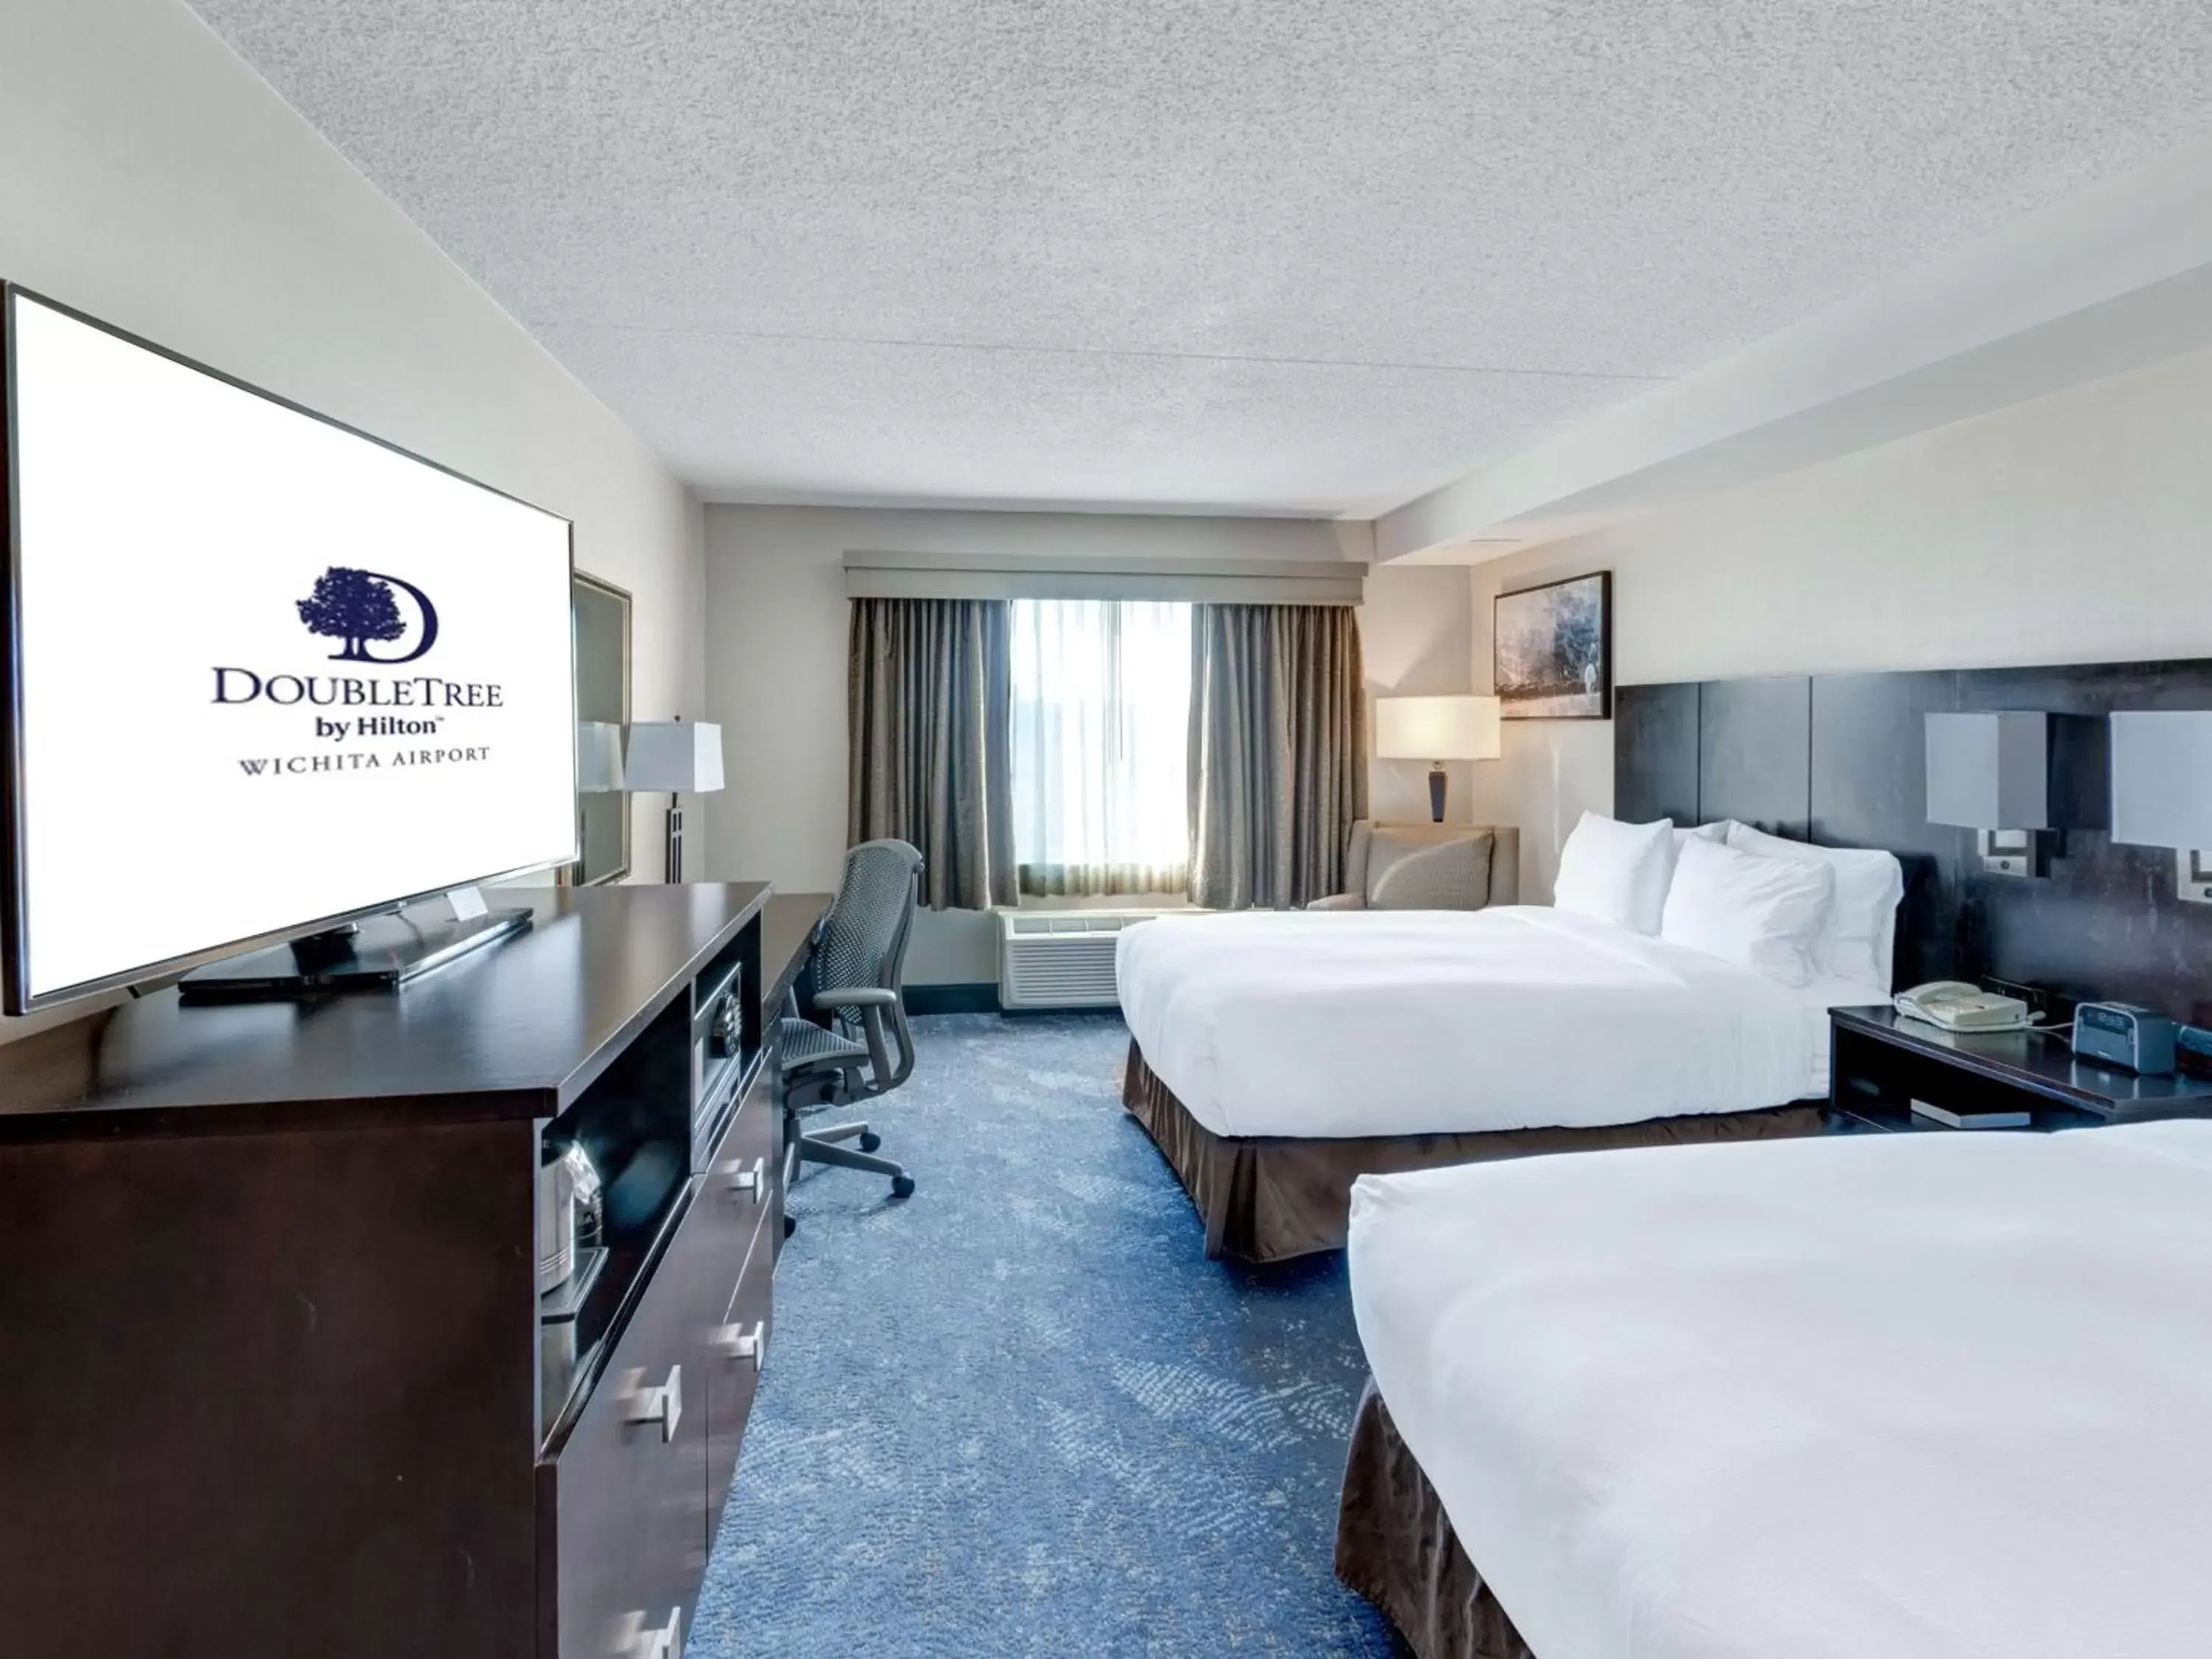 Bedroom in DoubleTree by Hilton Wichita Airport